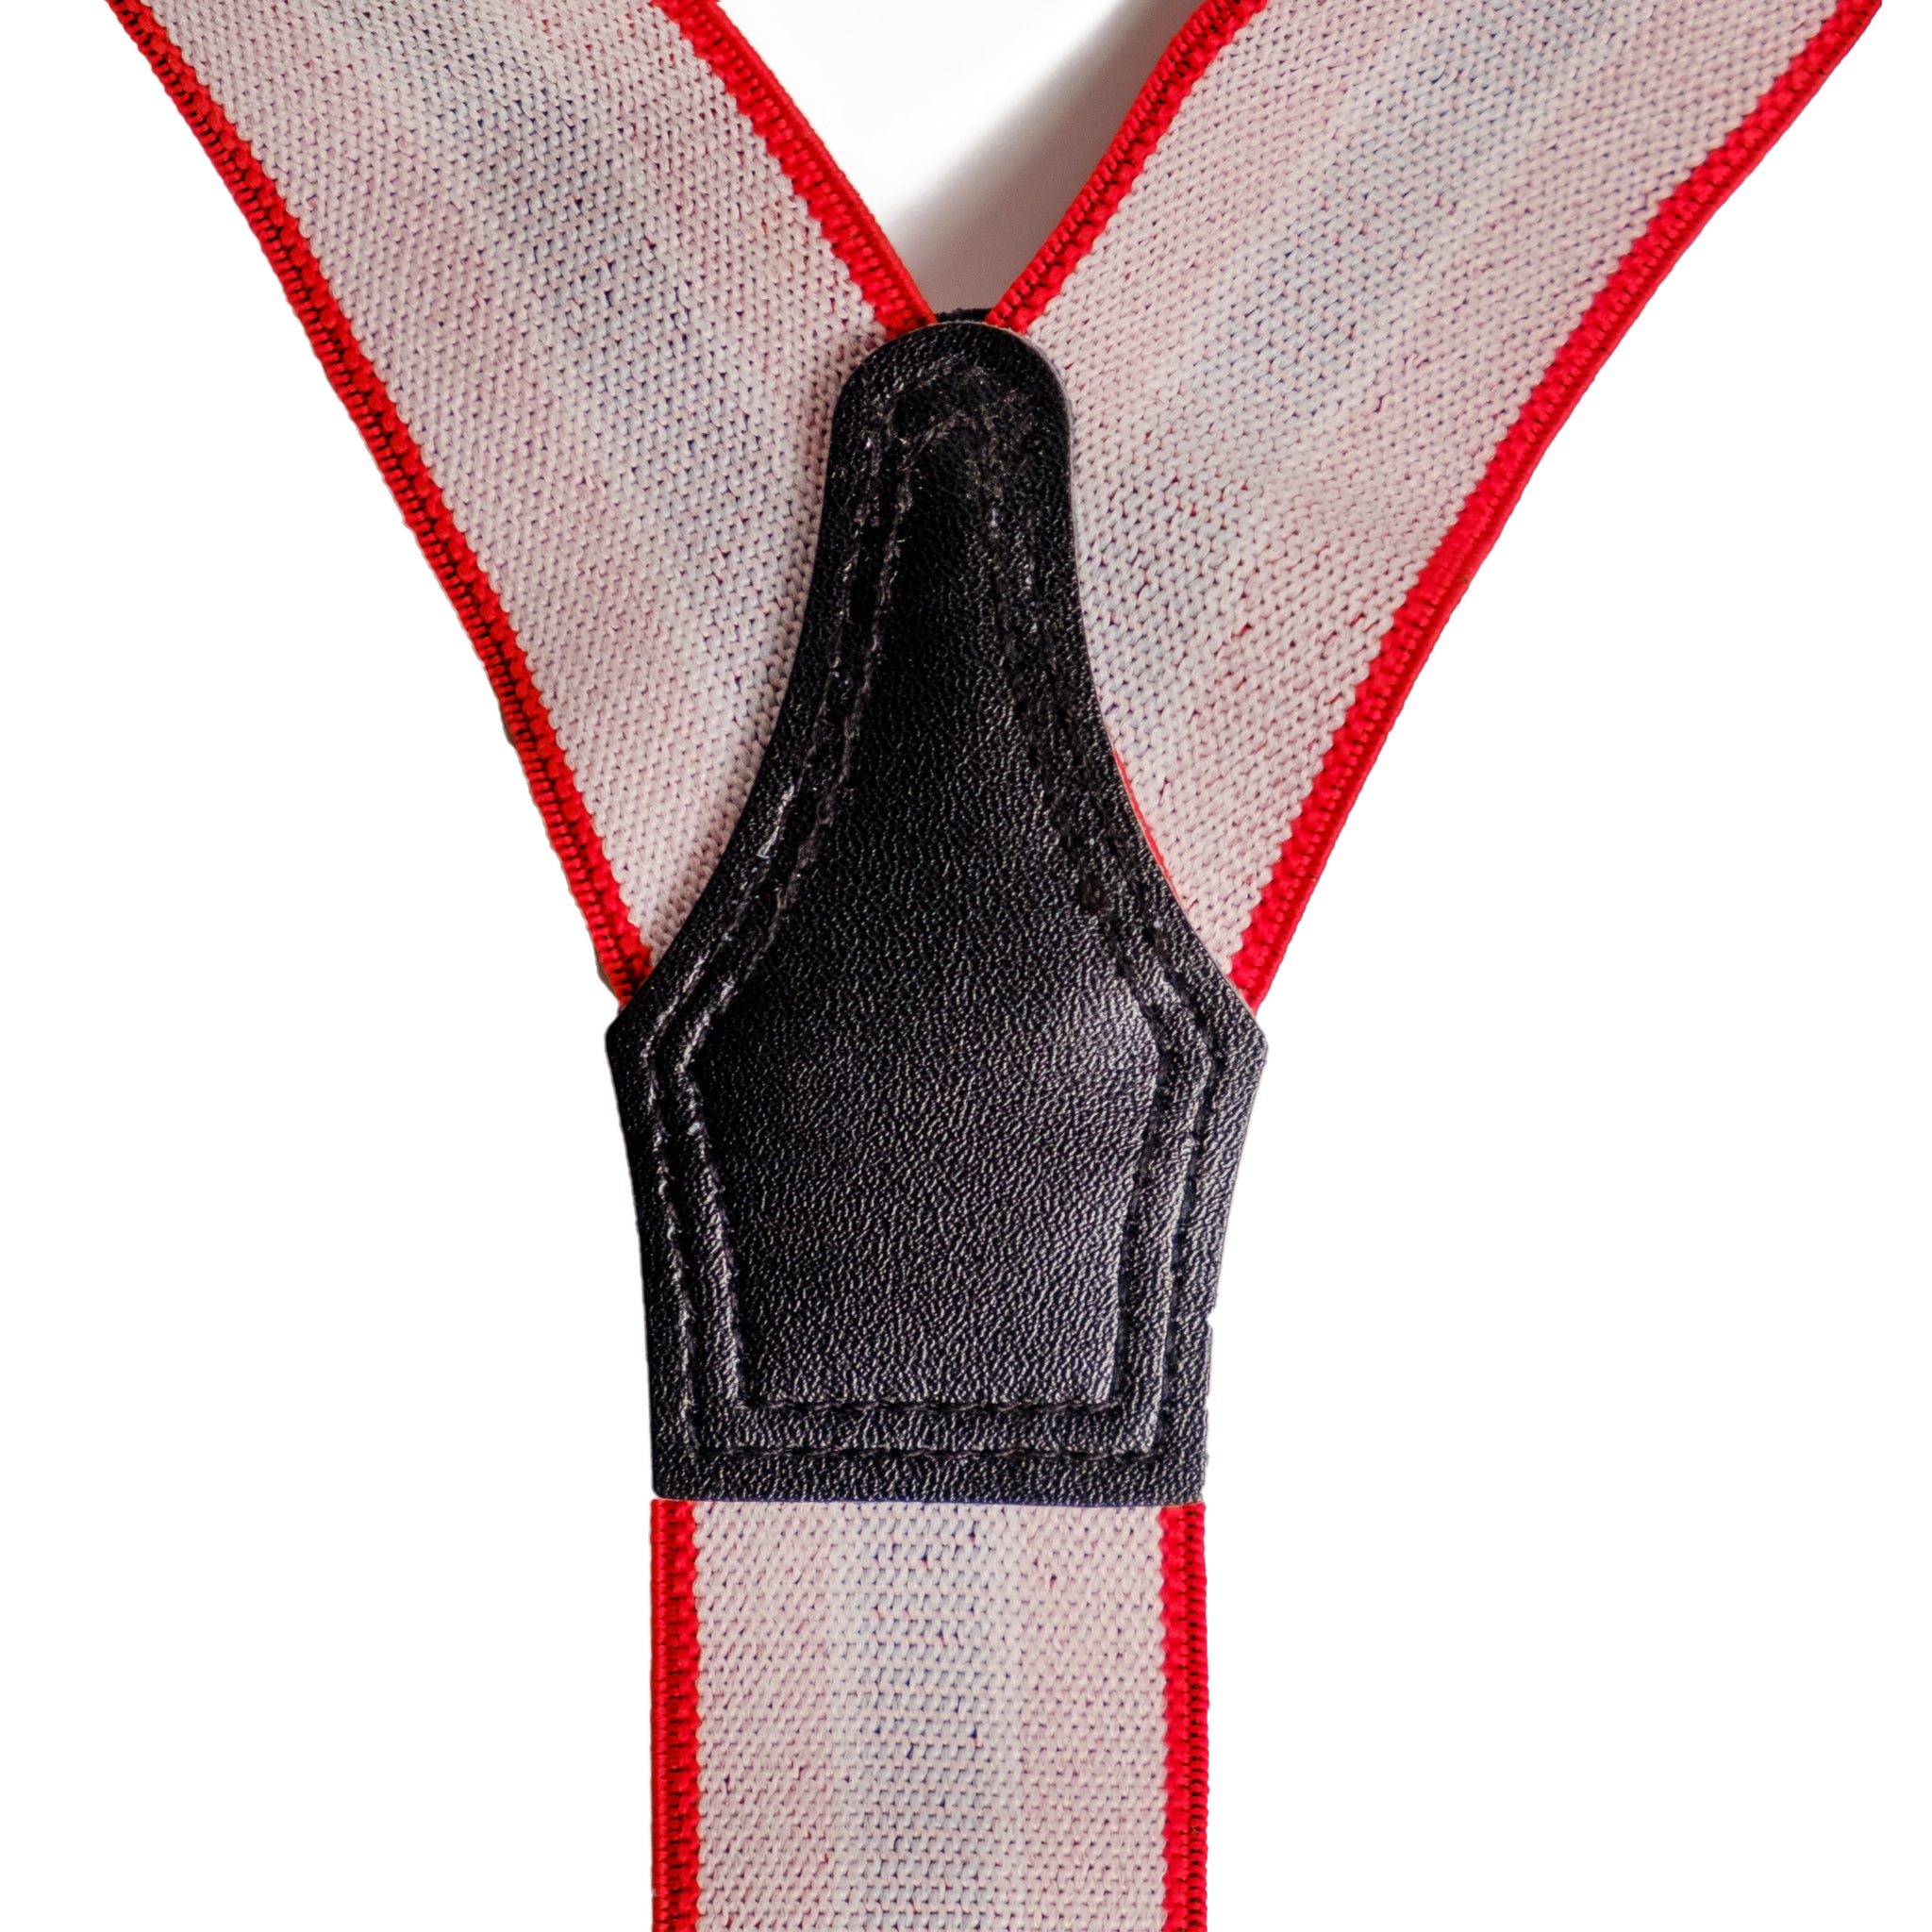 Chokore Y-shaped Convertible Suspenders (Navy Blue & Red)